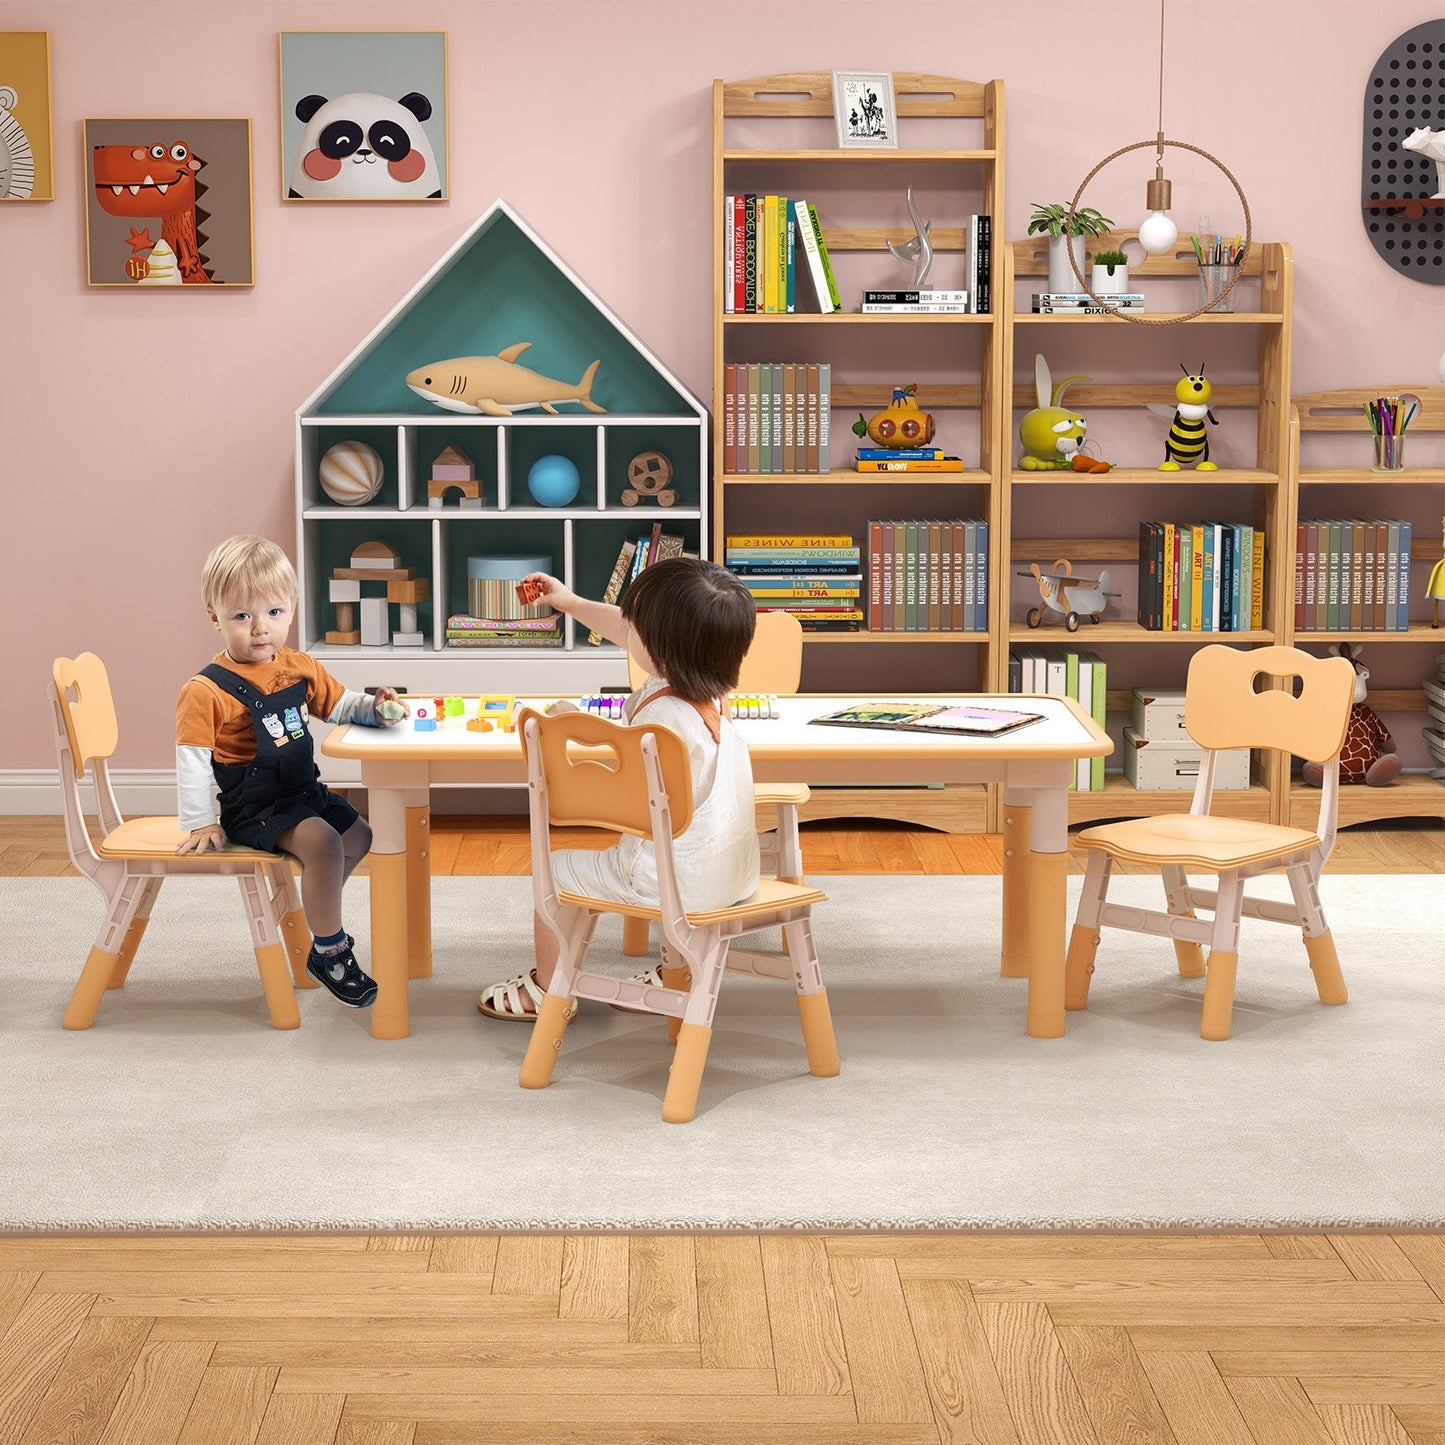 Kids Table and Chairs Set for 4 with Graffiti Desktop, Natural